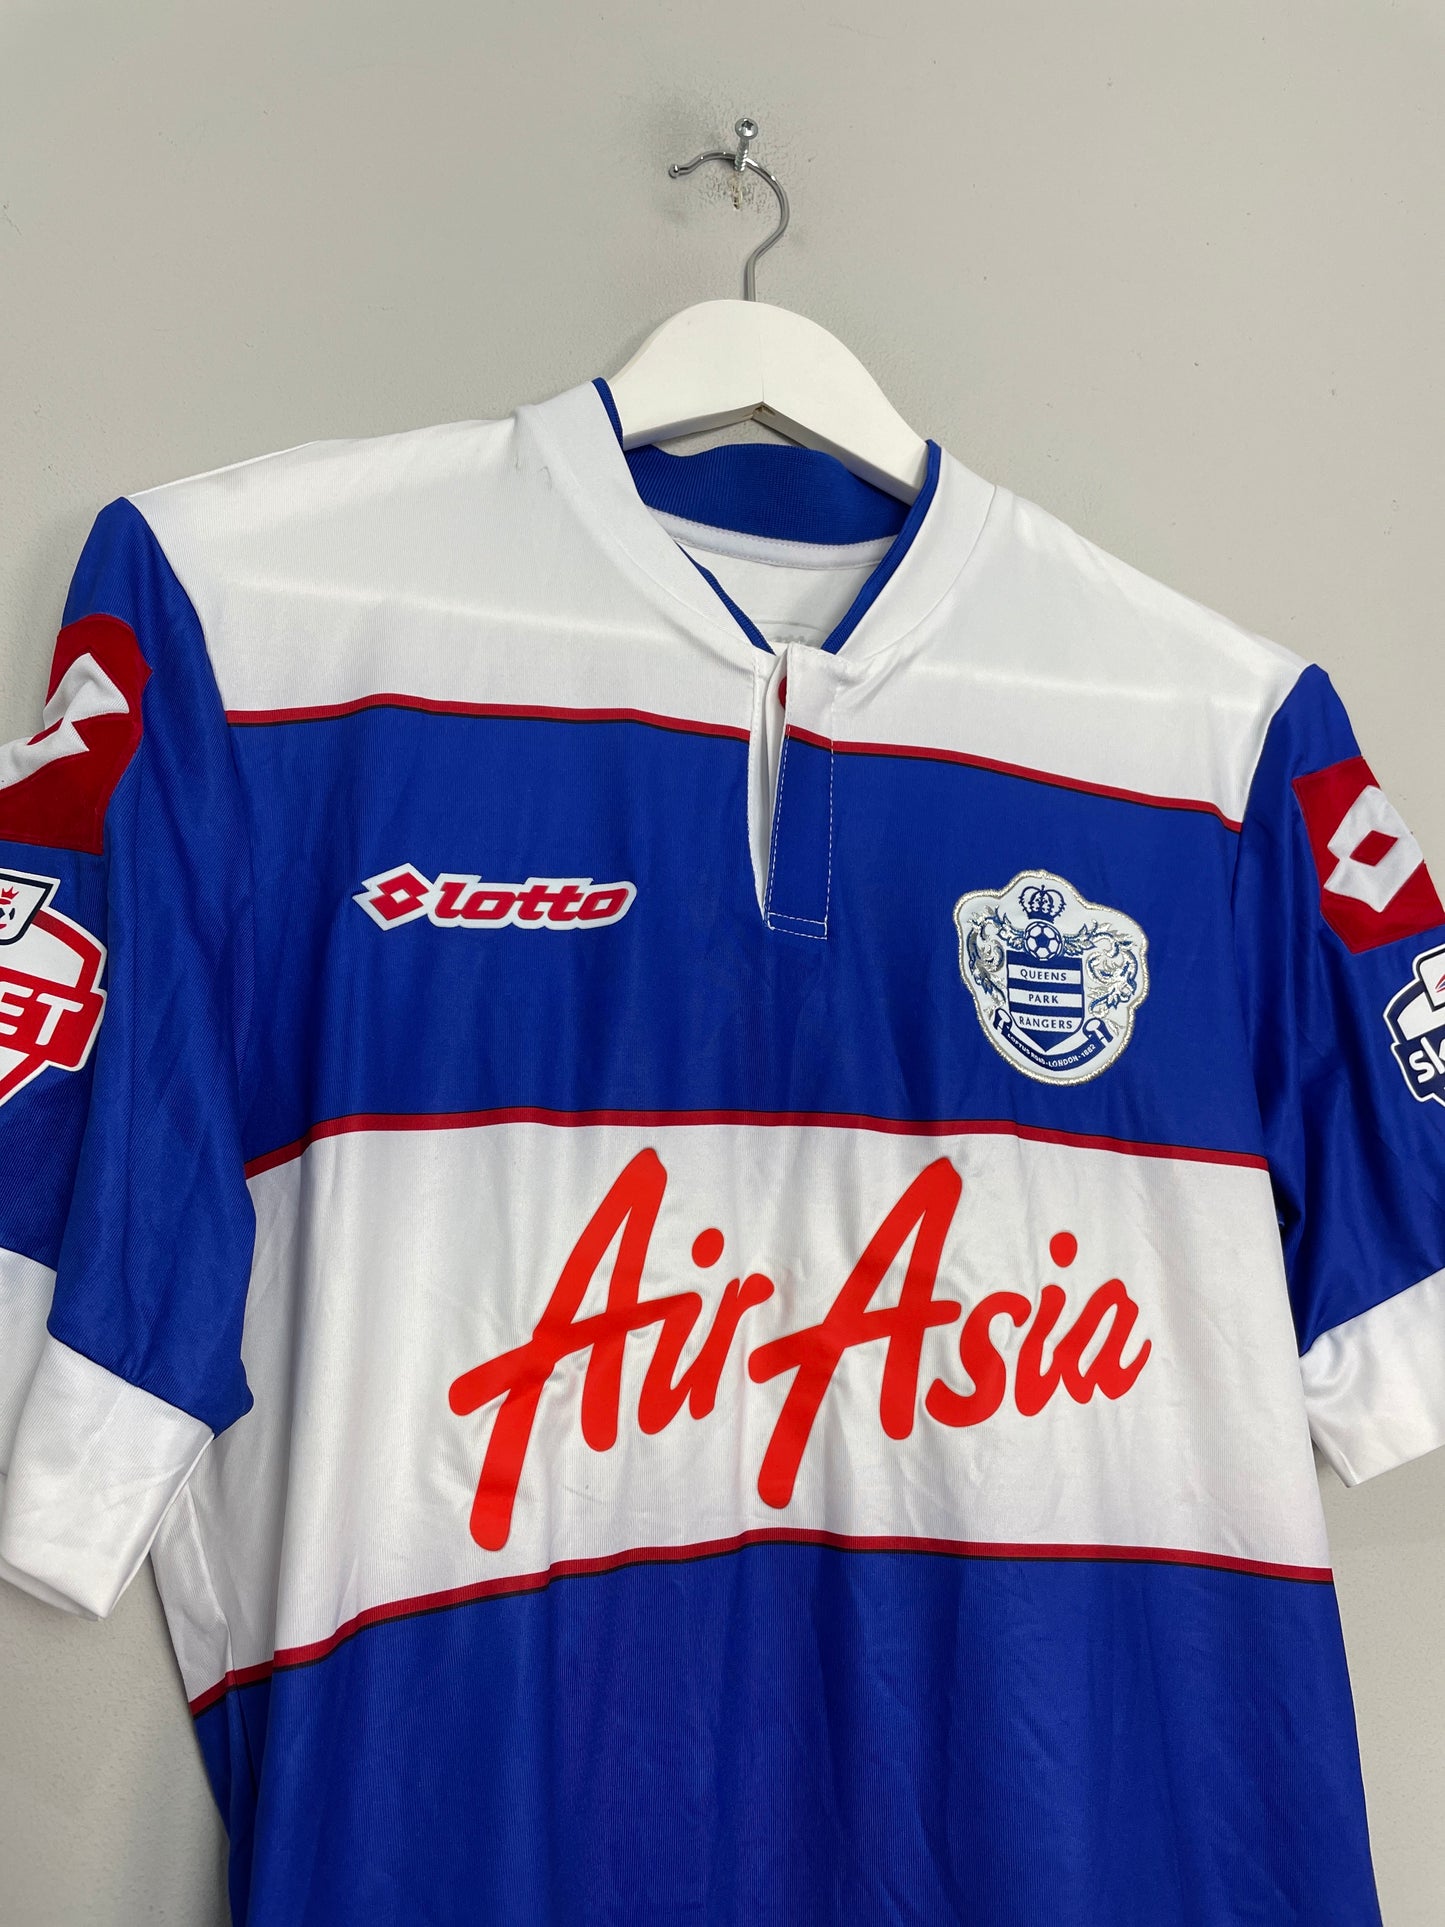 2013/14 QPR RAVEL #4 *MATCH ISSUE* HOME SHIRT (S) LOTTO